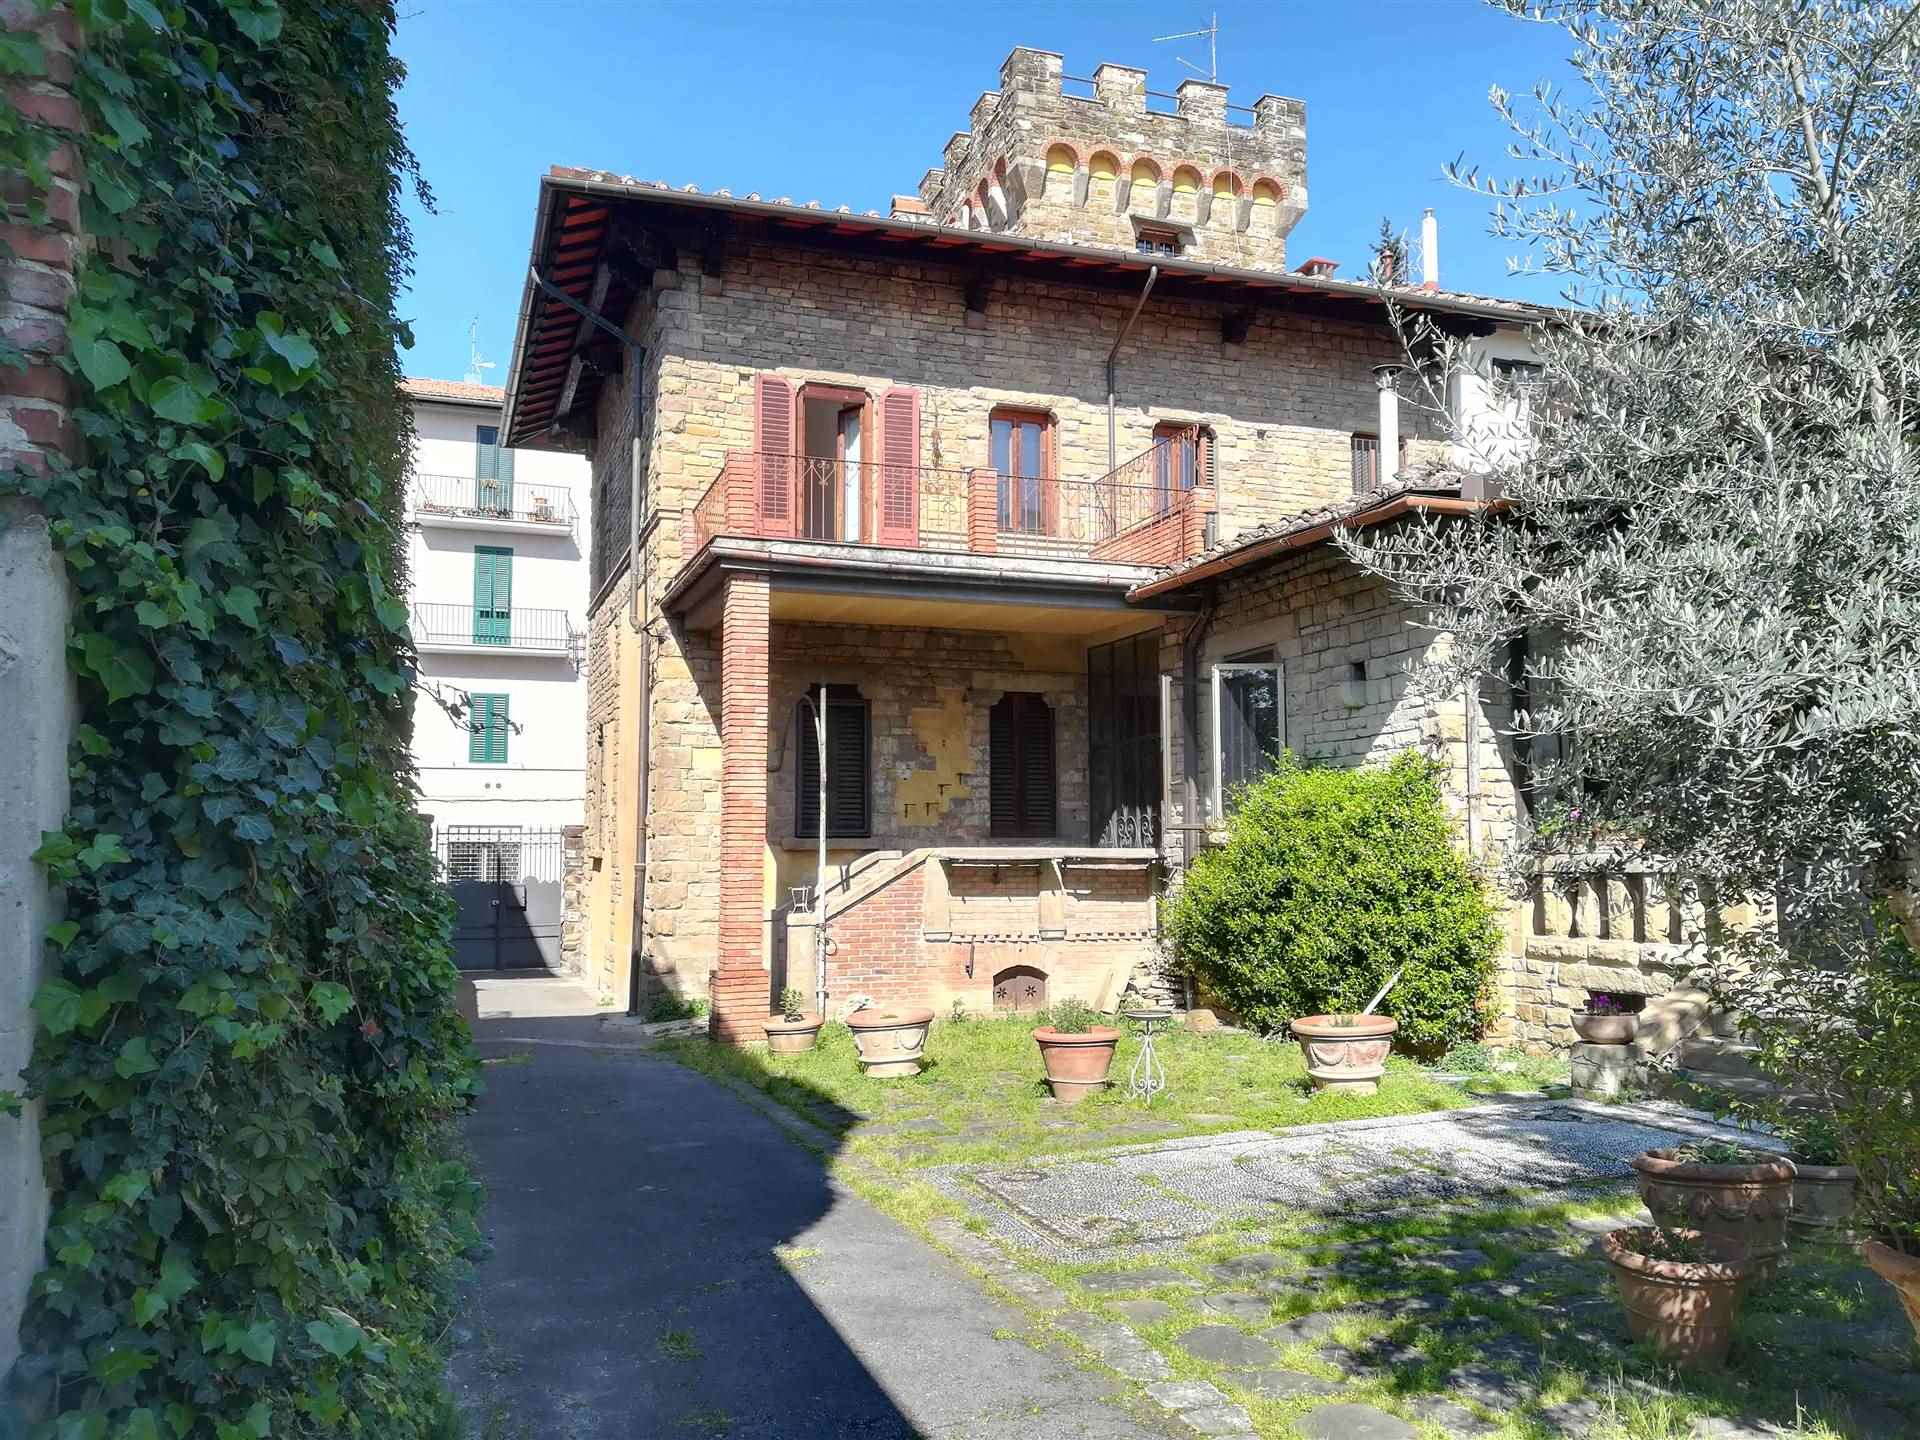 CAREGGI, FIRENZE, Terraced house for sale of 590 Sq. mt., Be restored, Heating Individual heating system, Energetic class: G, Epi: 175 kwh/m2 year, 